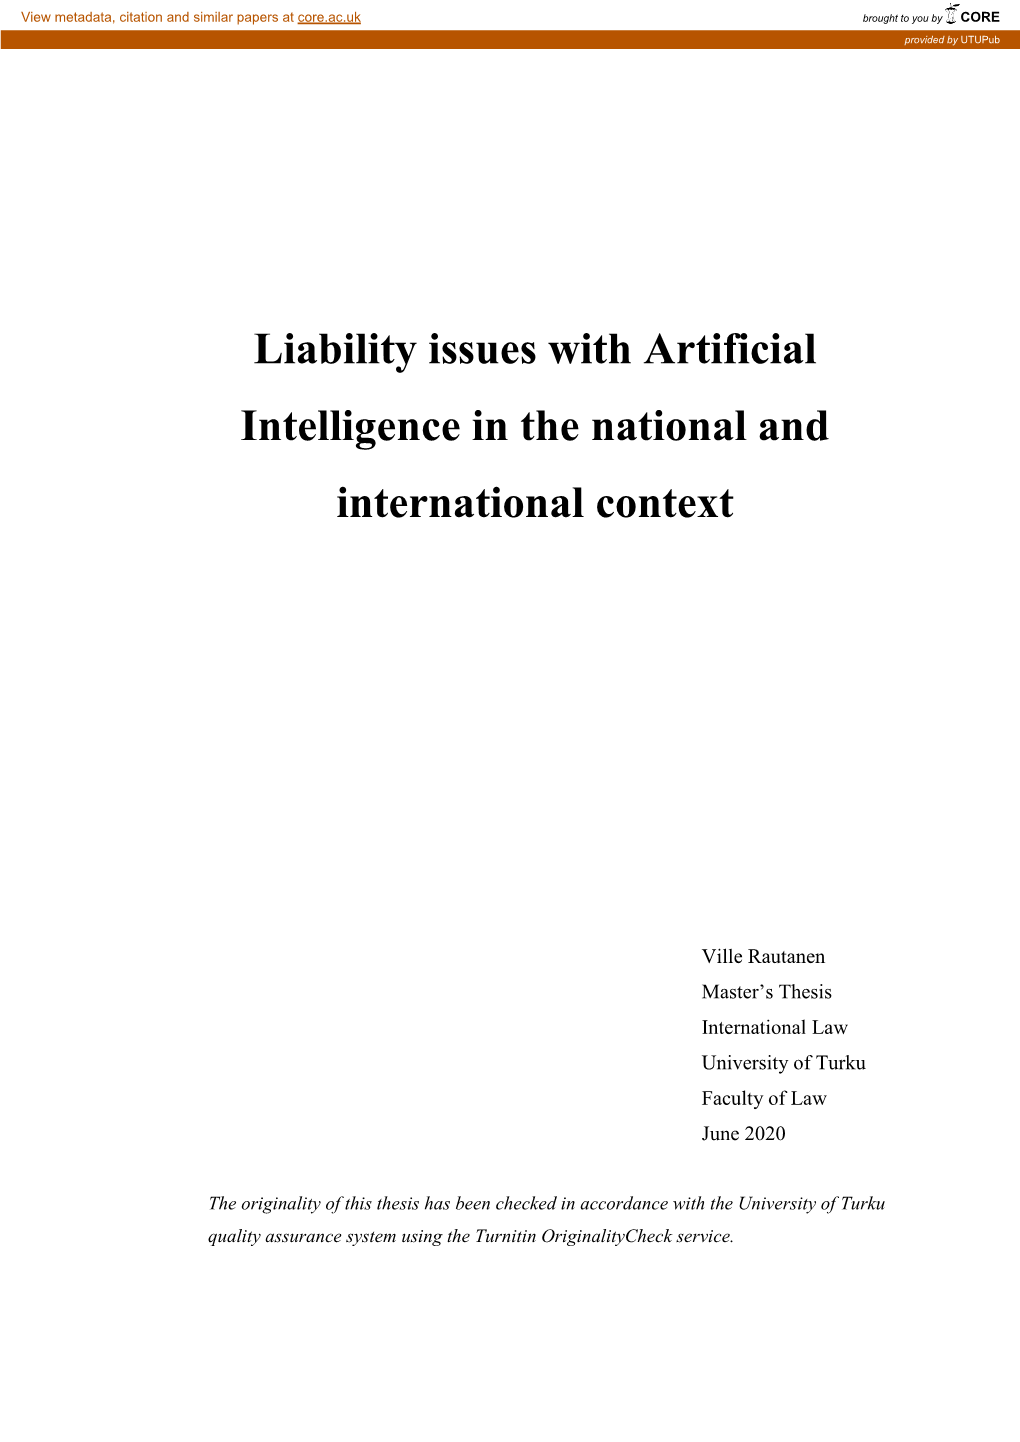 Liability Issues with Artificial Intelligence in the National and International Context